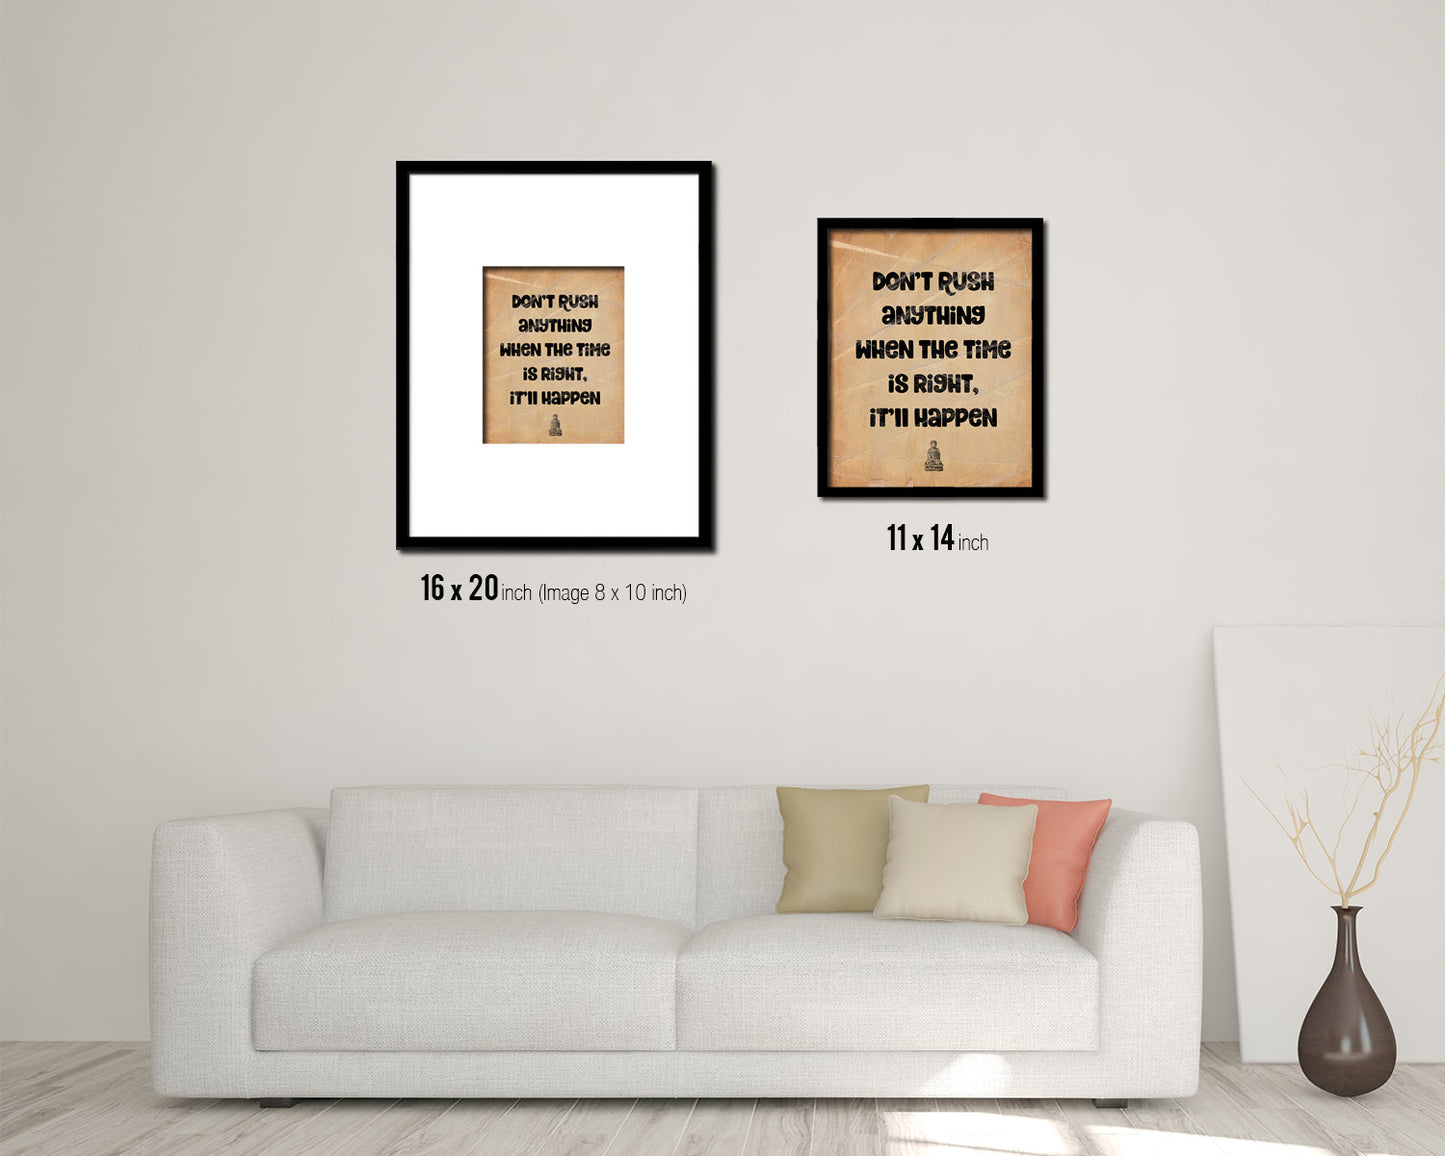 Don't rush anything when the time is right Quote Paper Artwork Framed Print Wall Decor Art